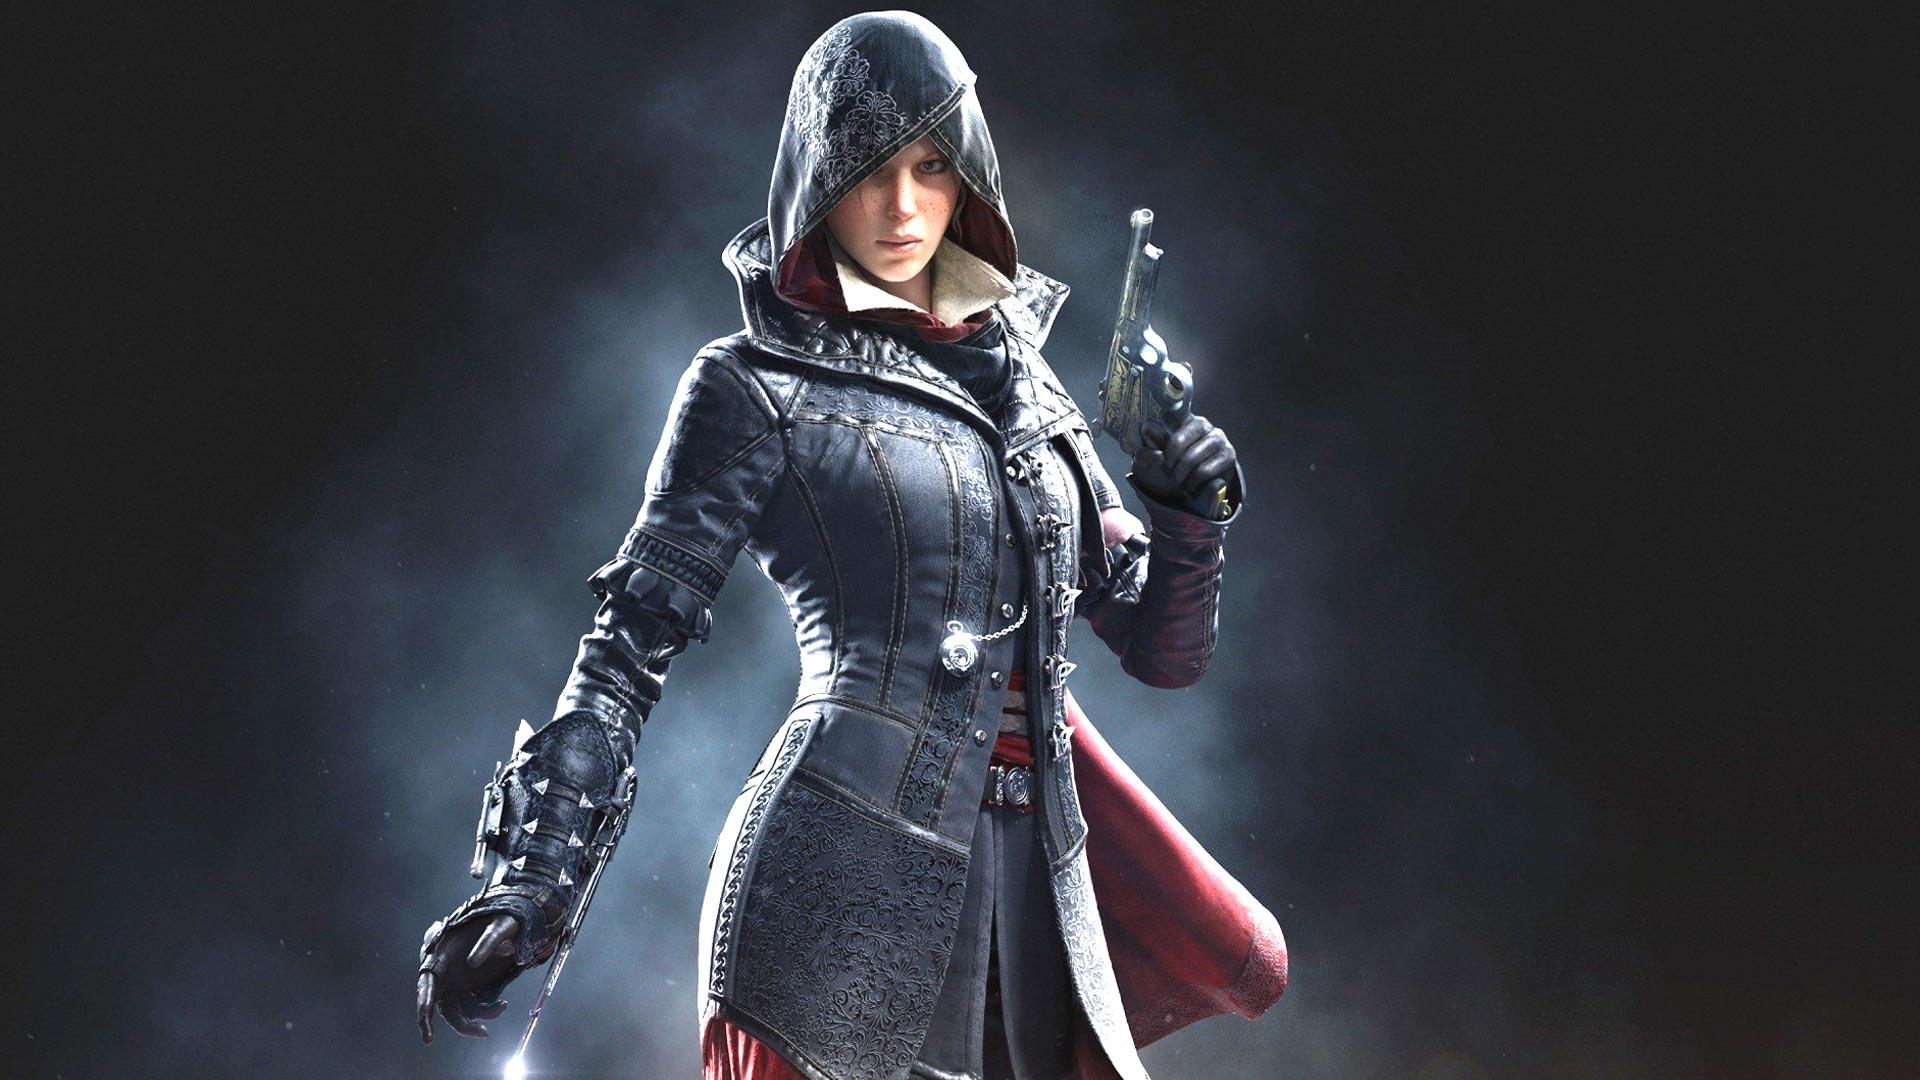 Assassin's Creed Syndicate Evie Frye wallpaper